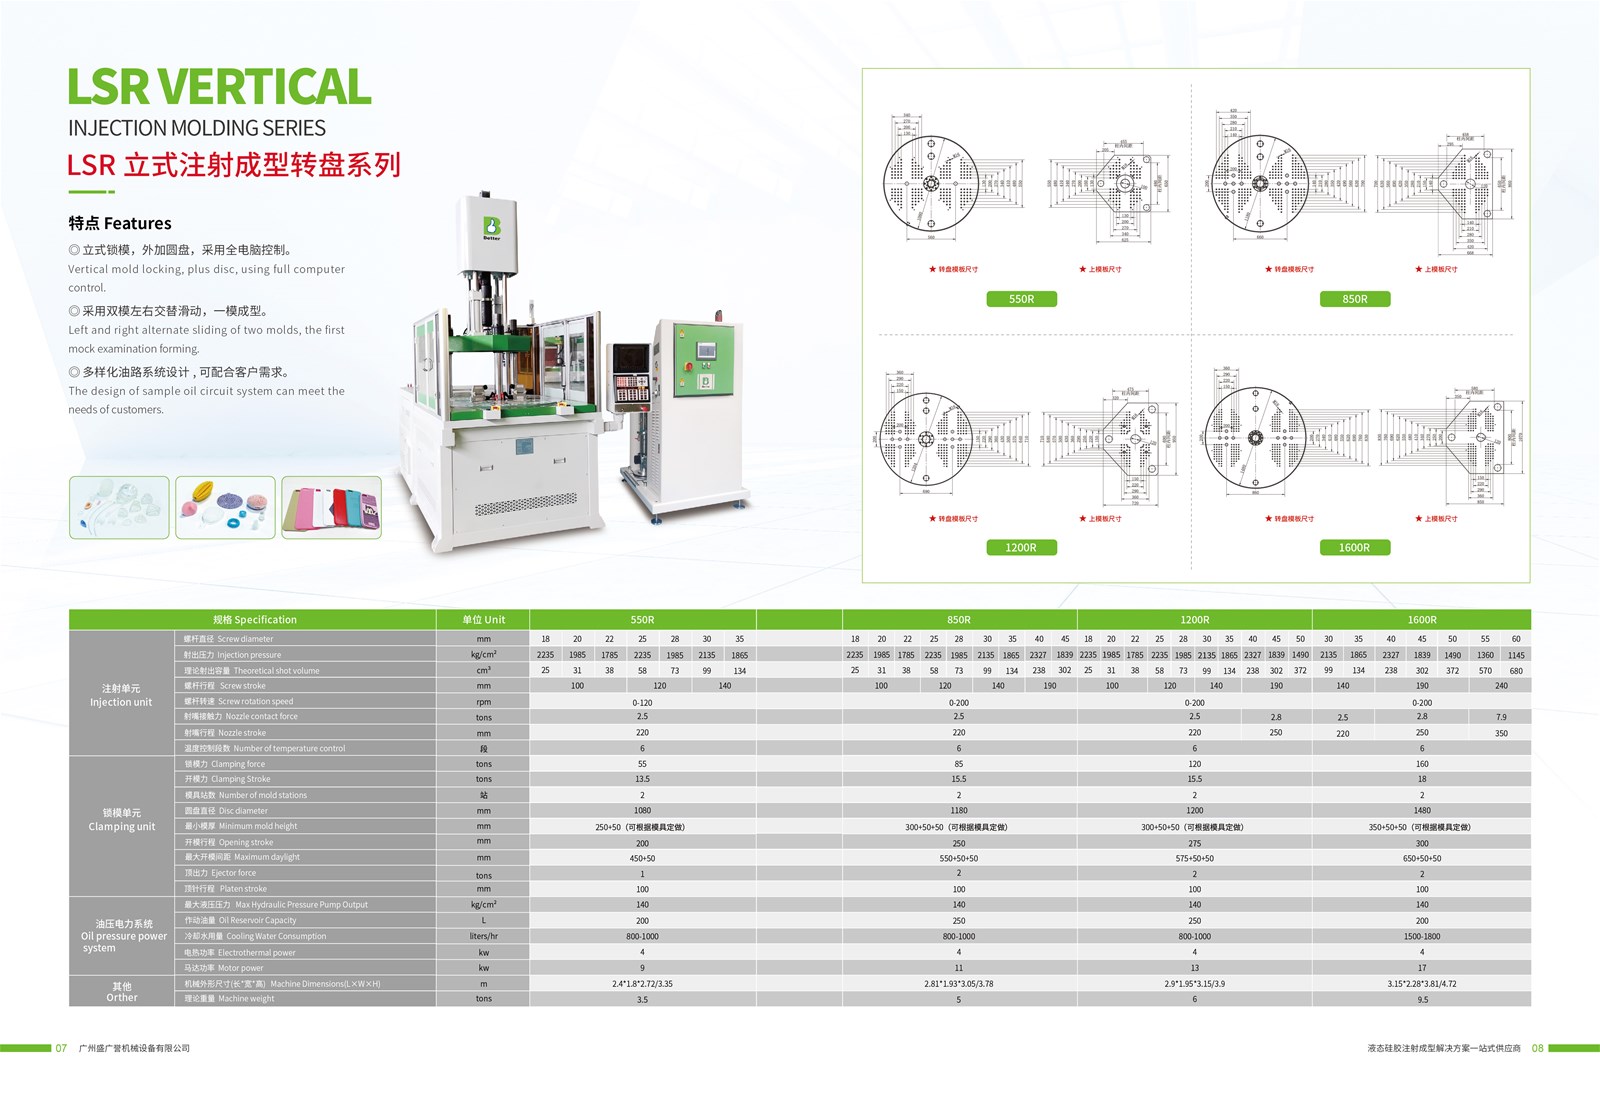 Chinese vertical lsr injection molding machine manufacturer